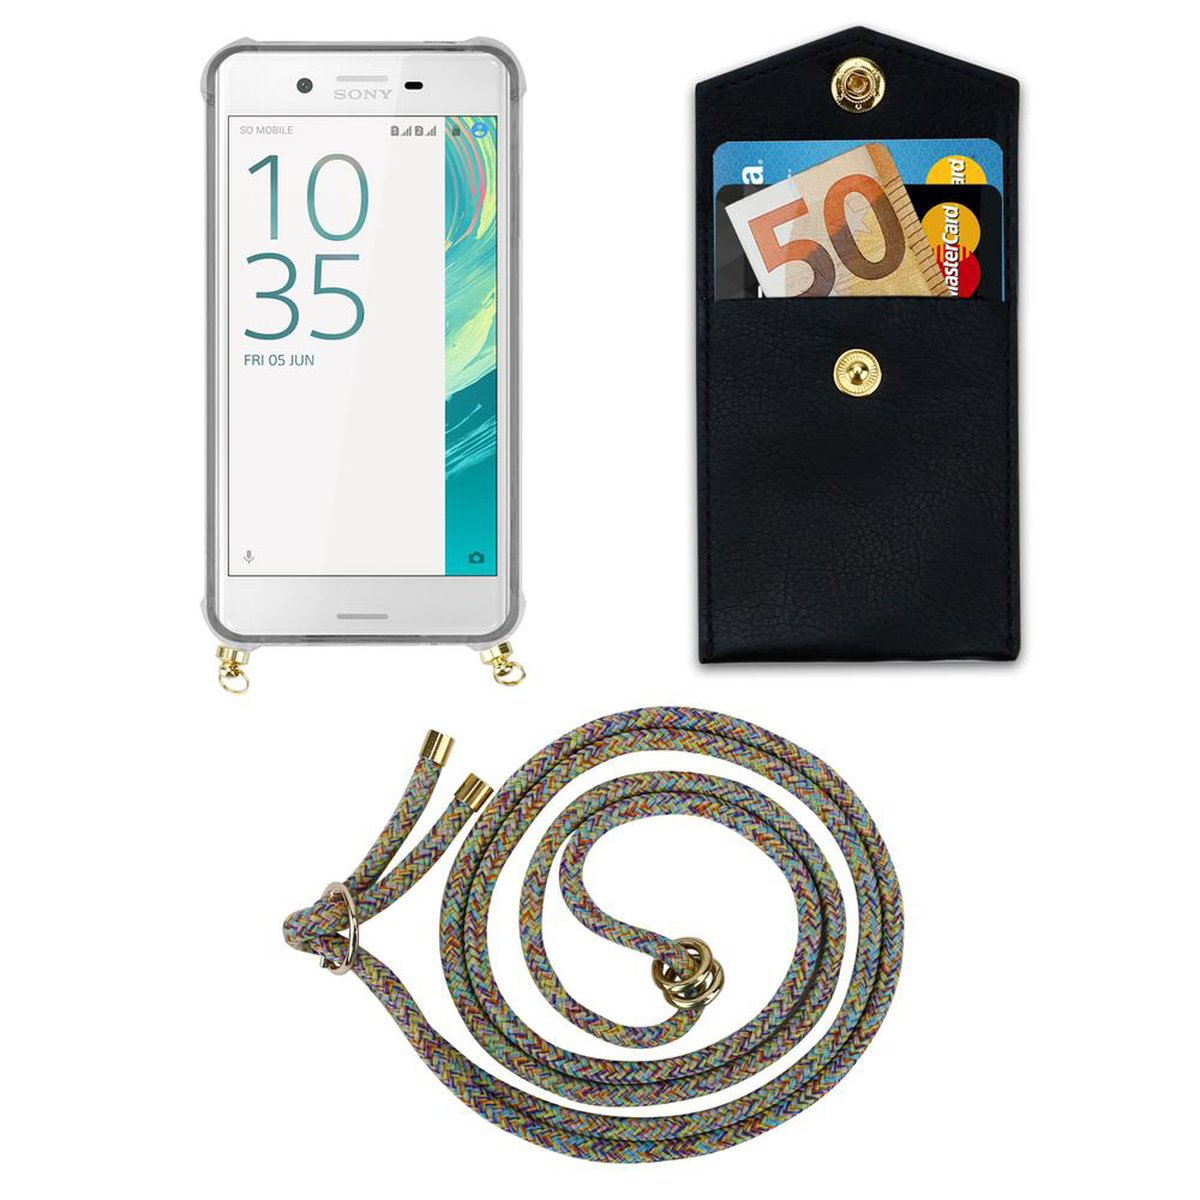 CADORABO Handy Kette mit Backcover, und X, Kordel Hülle, Ringen, Band RAINBOW Xperia Gold Sony, abnehmbarer